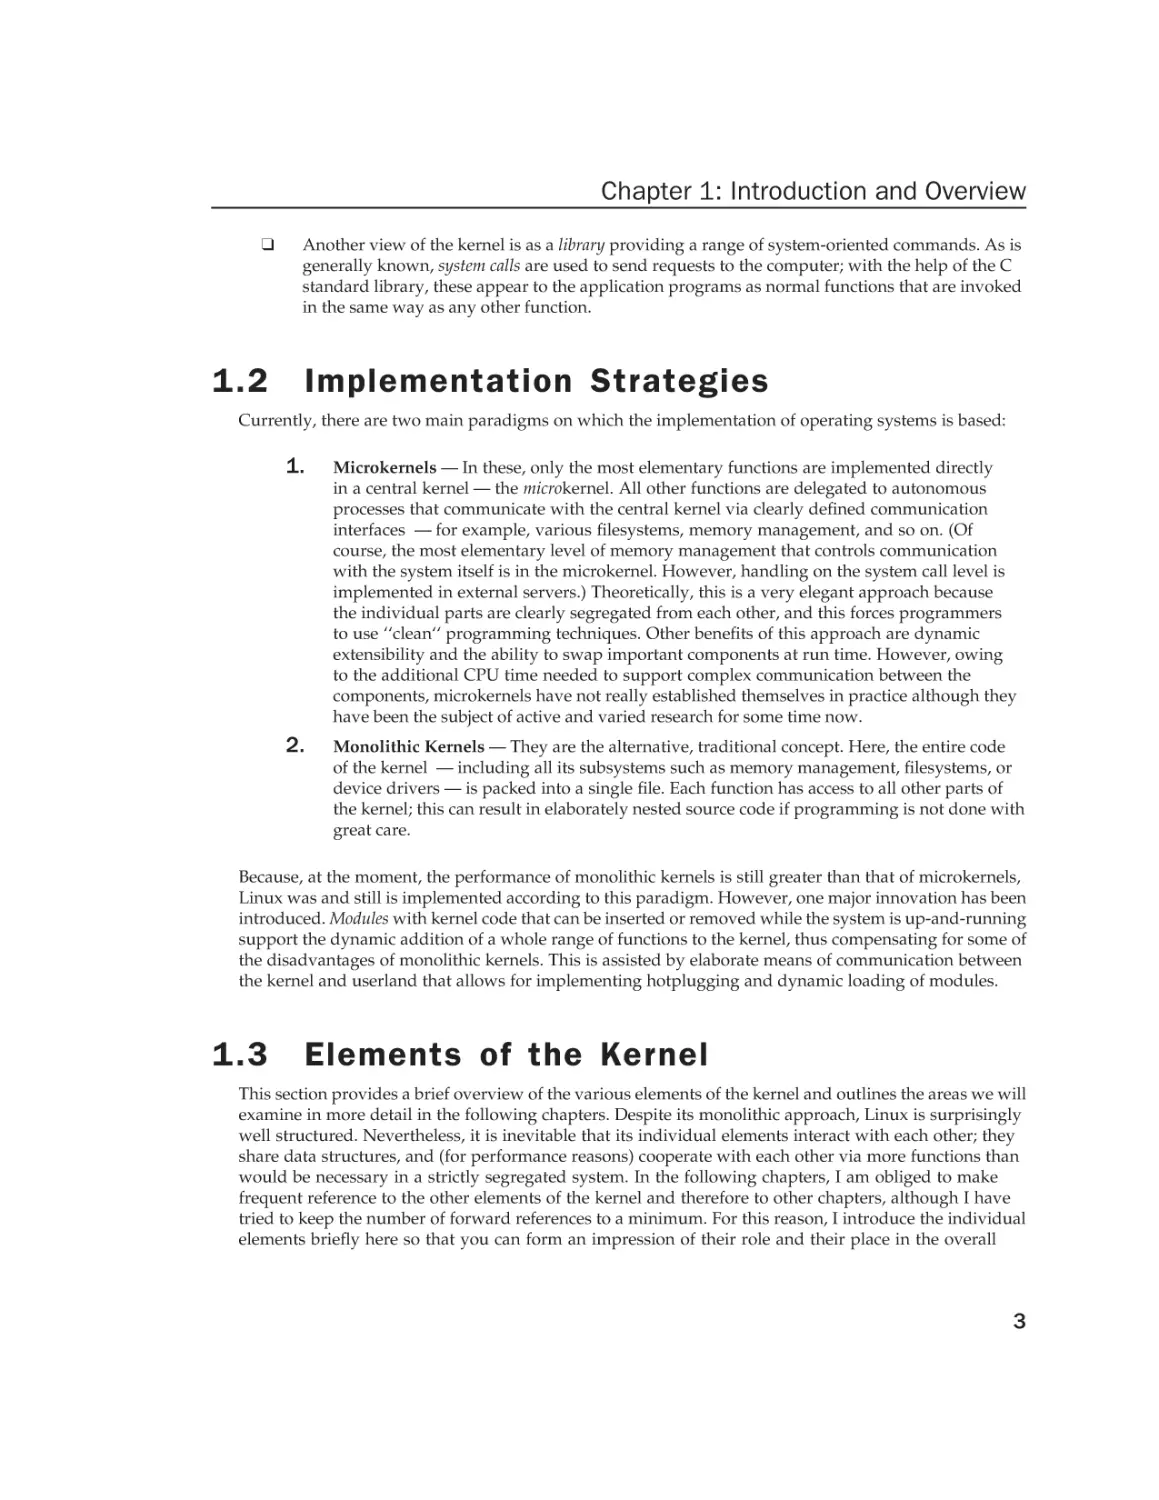 1.2 Implementation Strategies
1.3 Elements of the Kernel